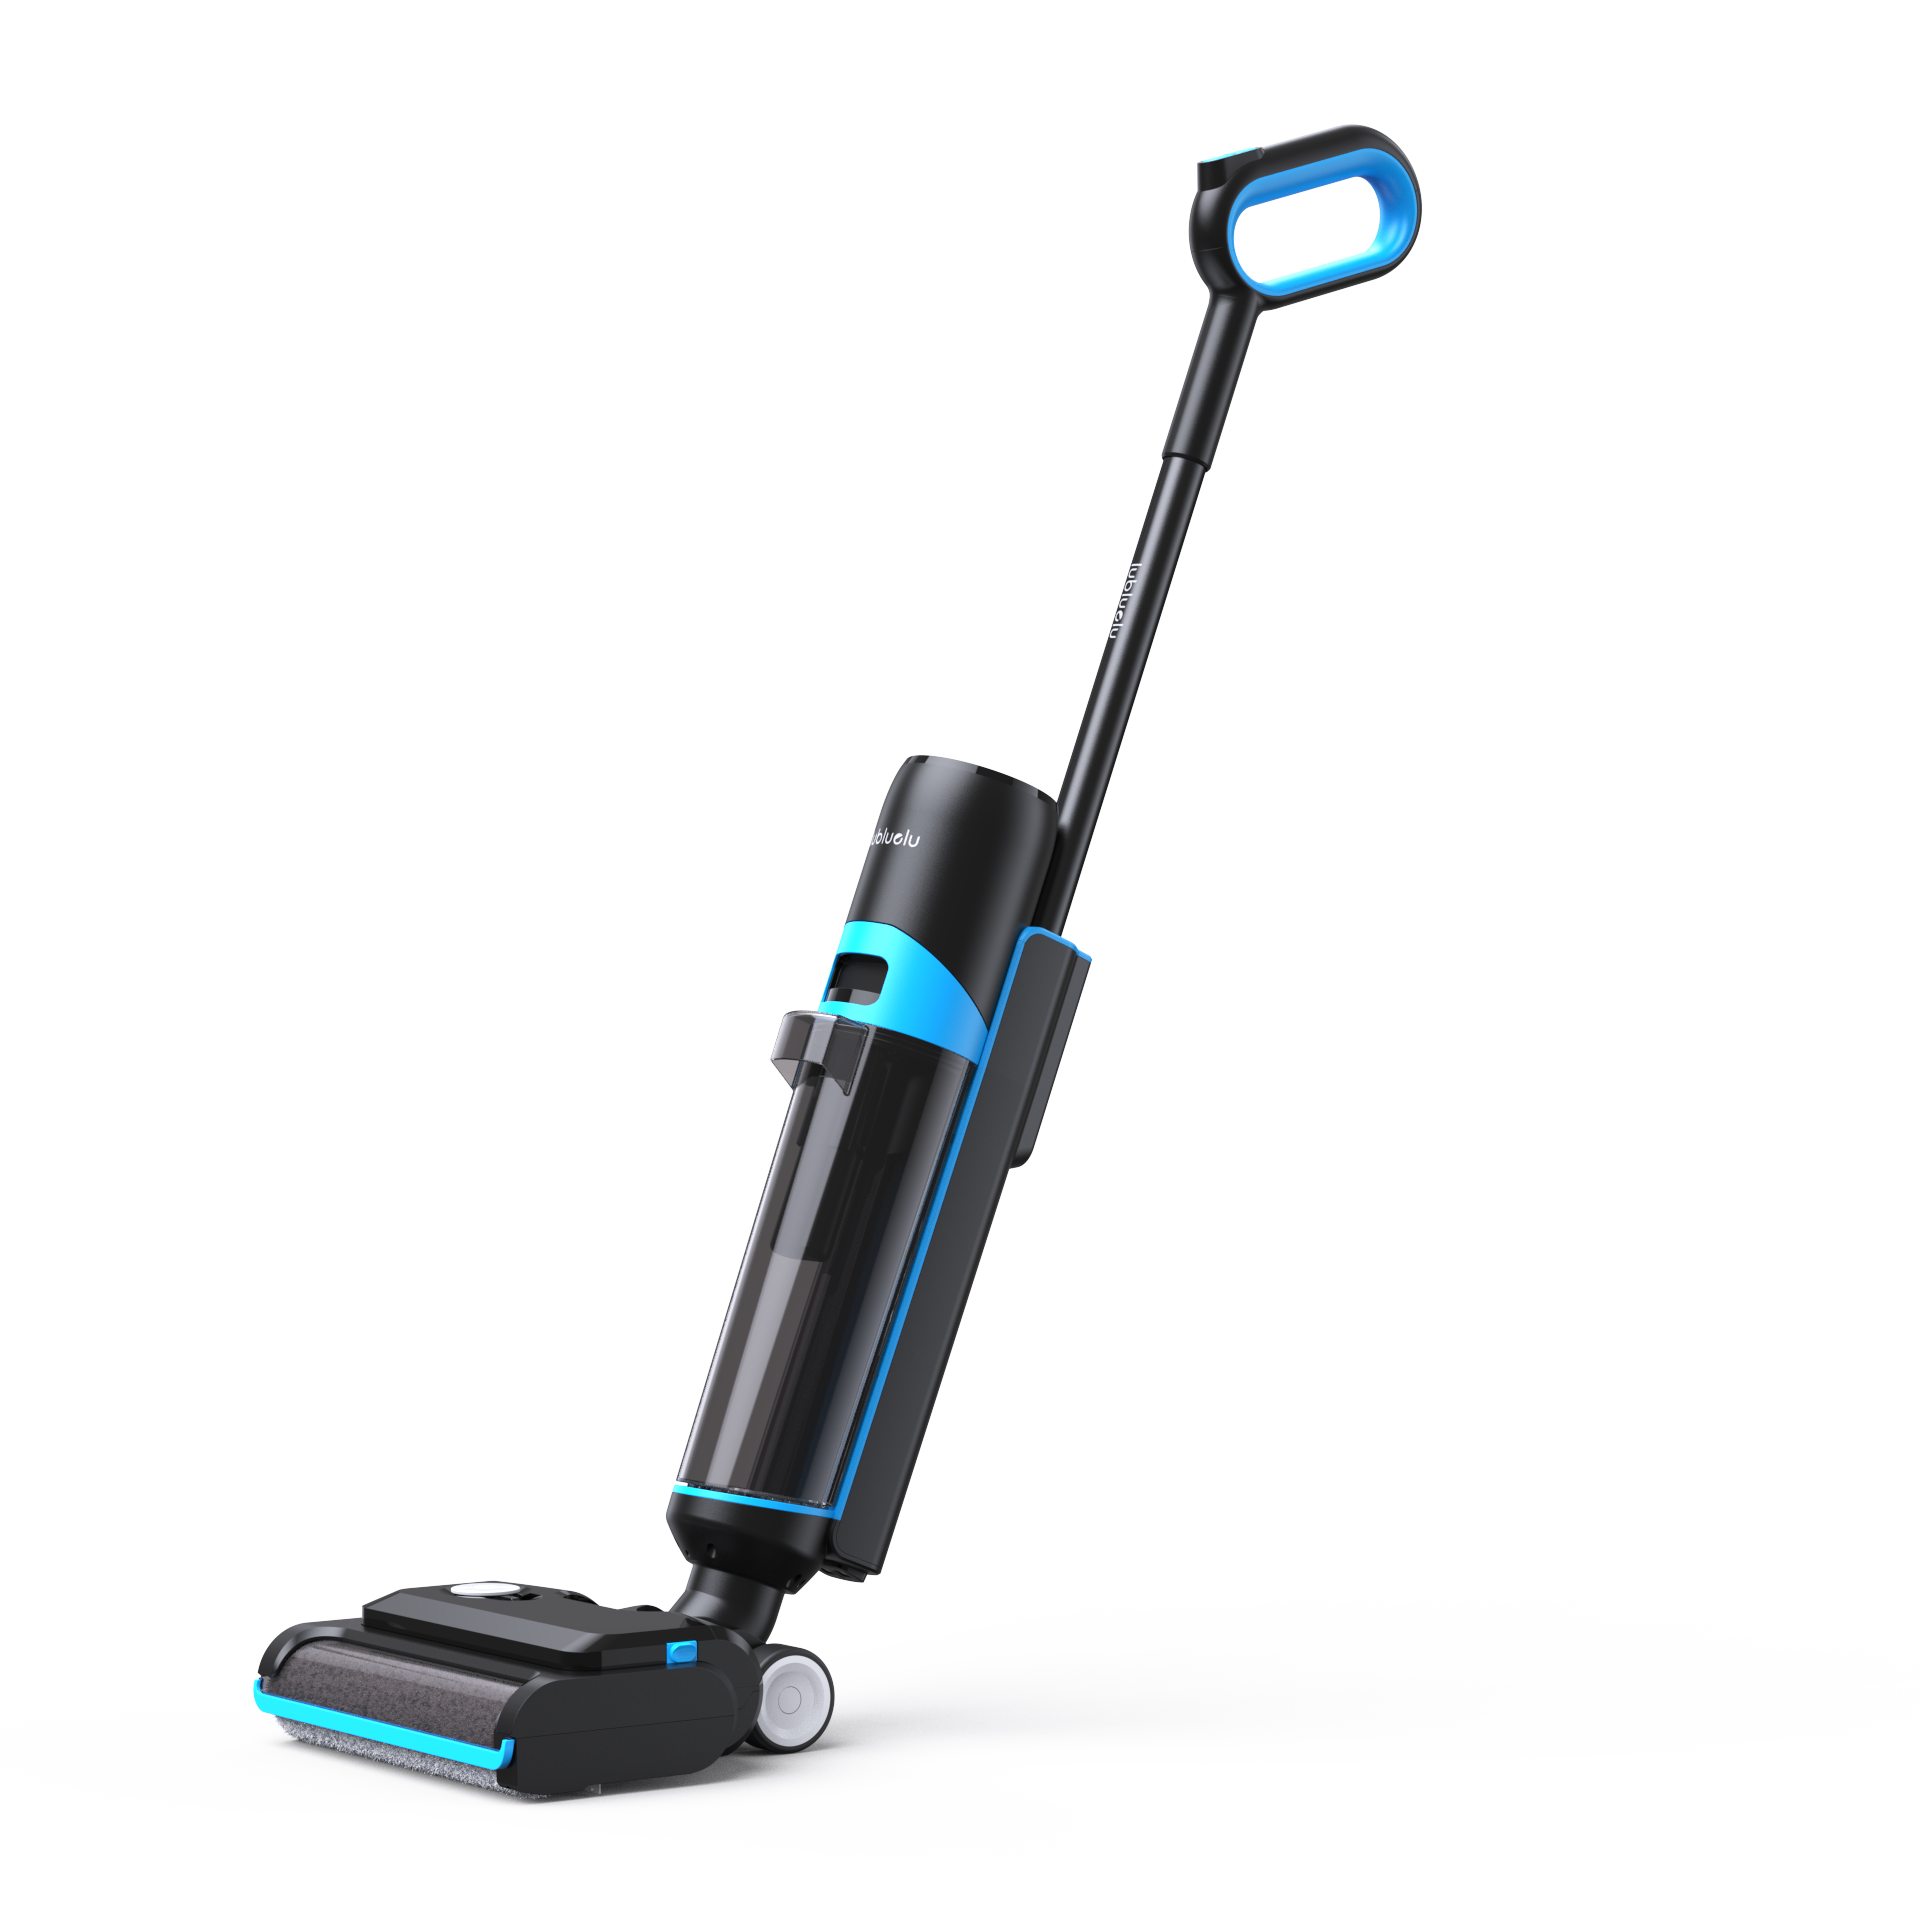 Experience powerful and convenient cleaning with Lubluelu Cordless